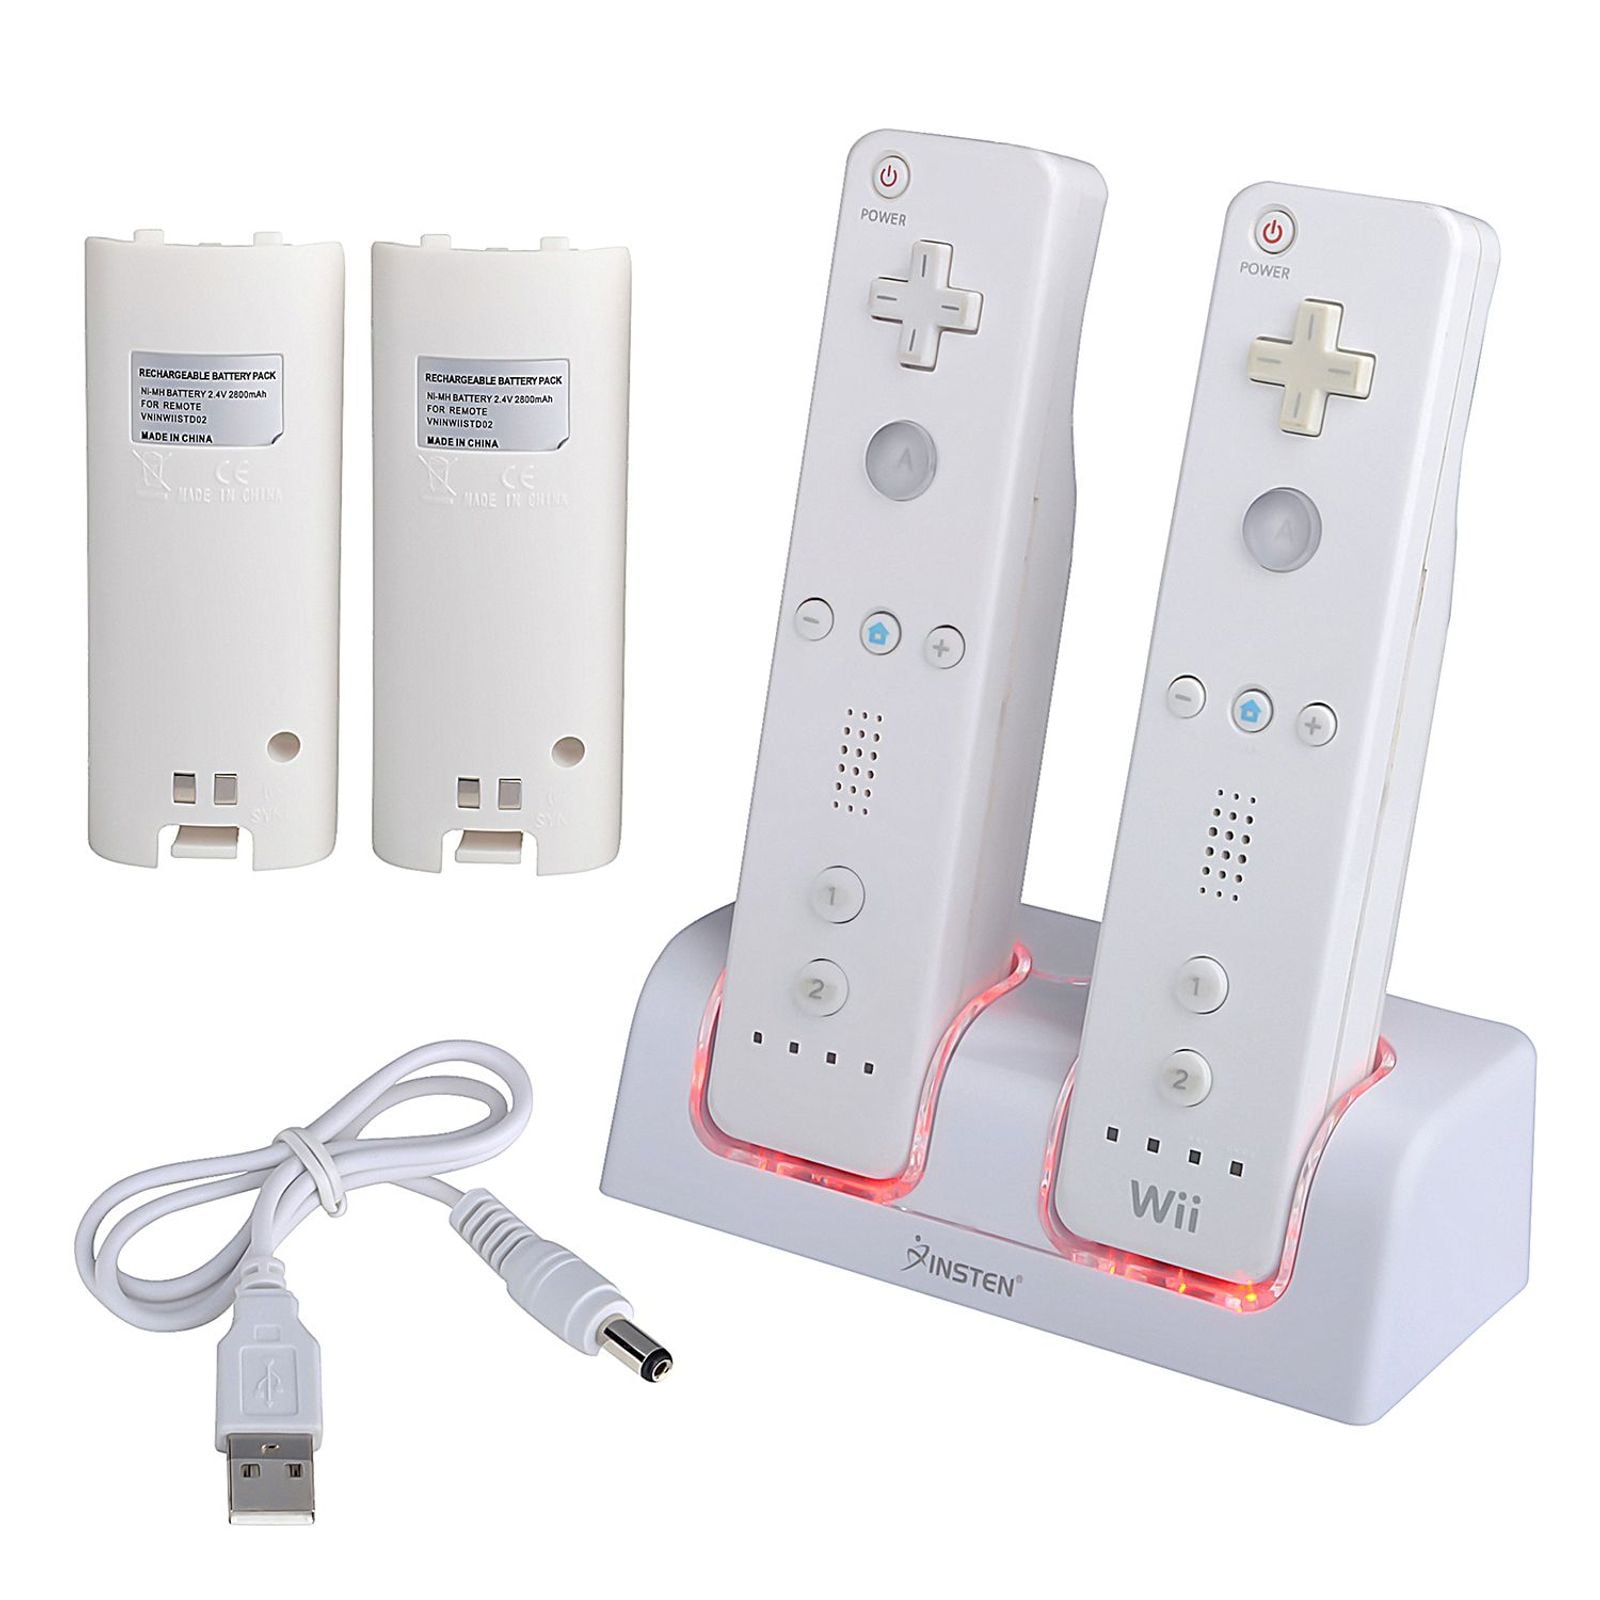 Charger Charging Dock Station 2800mAh Battery For Wii /Wii U Remote Controller Replacement 4 Batteries + Charging Dock 